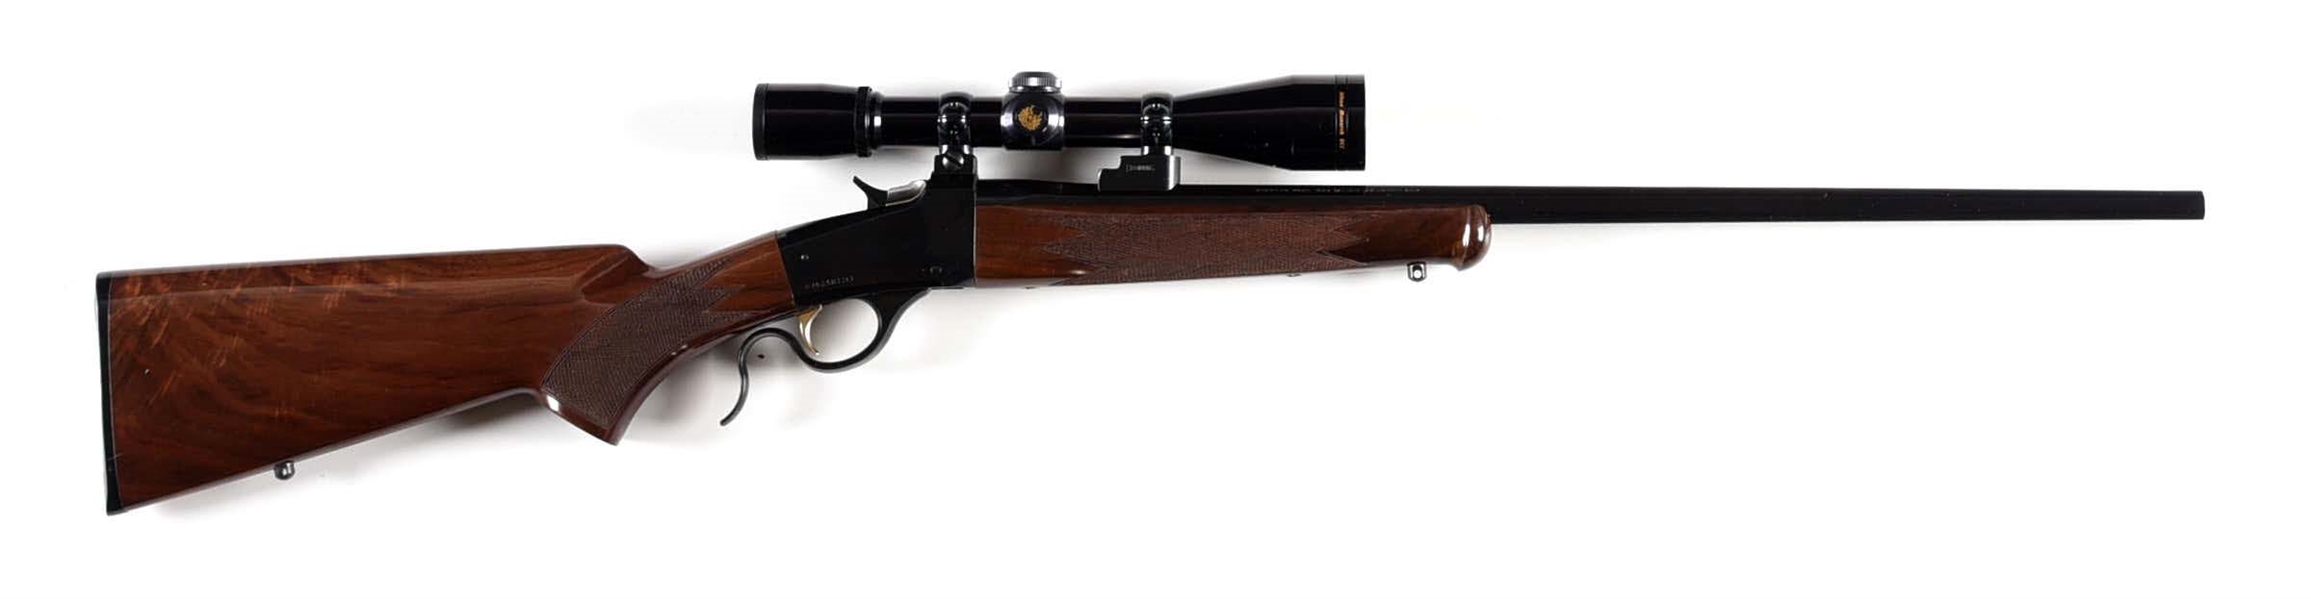 (M) BROWNING MODEL 1885 LOW WALL SINGLE SHOT RIFLE IN .22 HORNET.